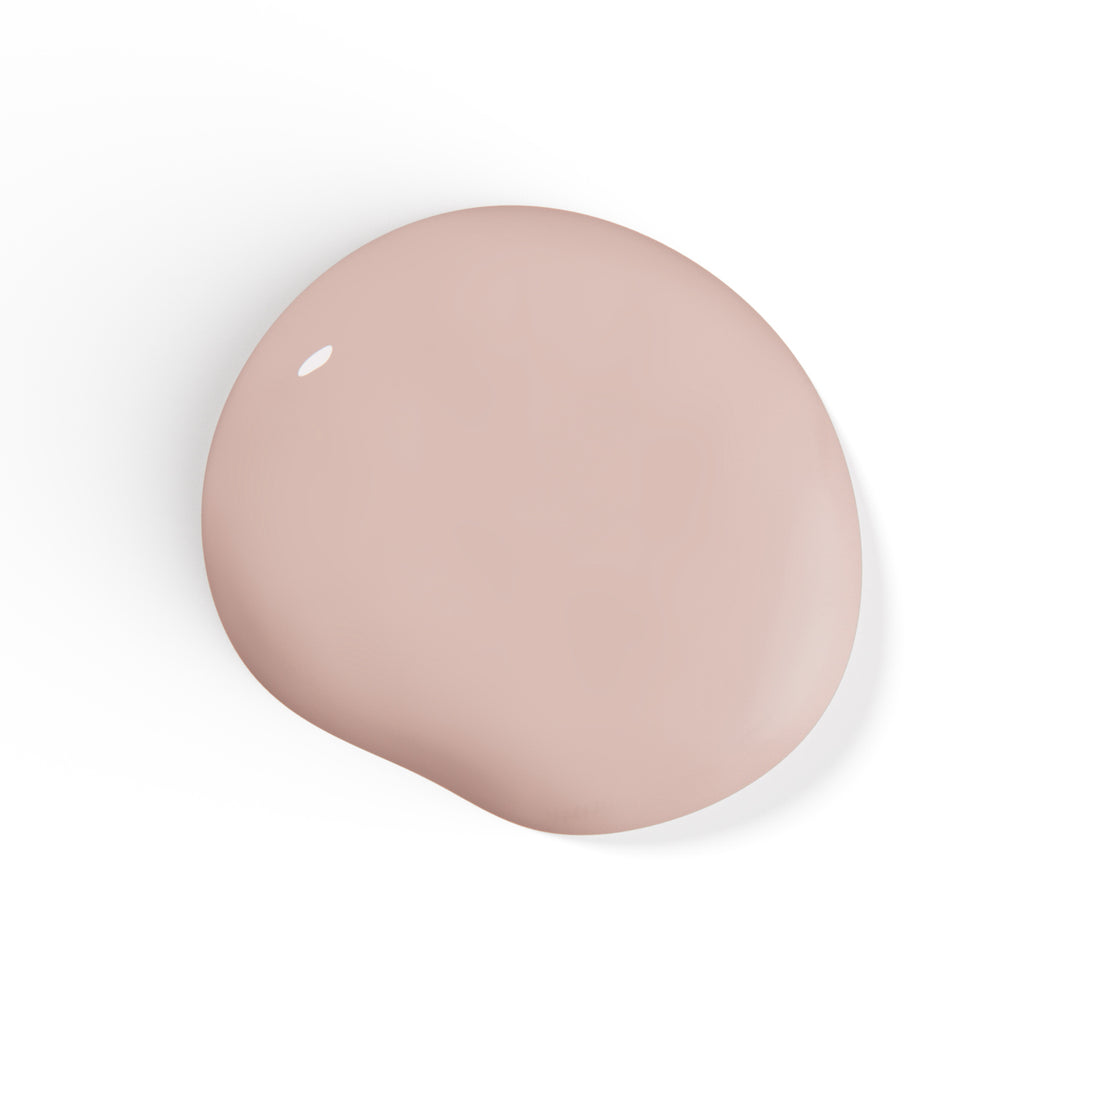 A droplet of Liberation Nails nail polish in a soft nude pink color, Darling.